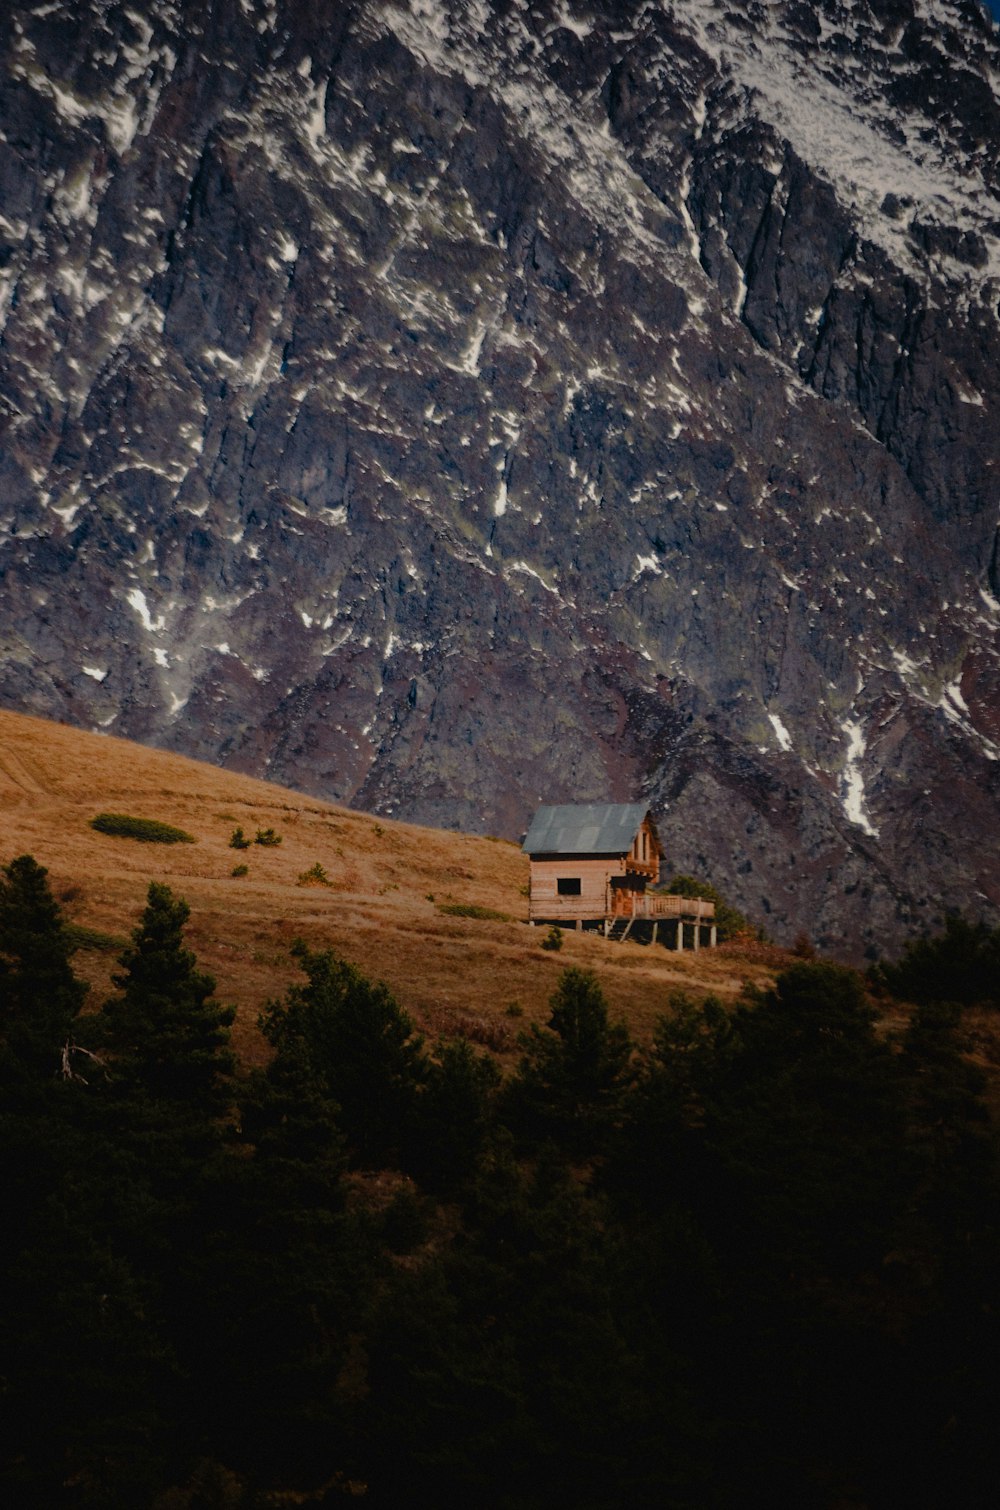 a house on a hill with a mountain in the background